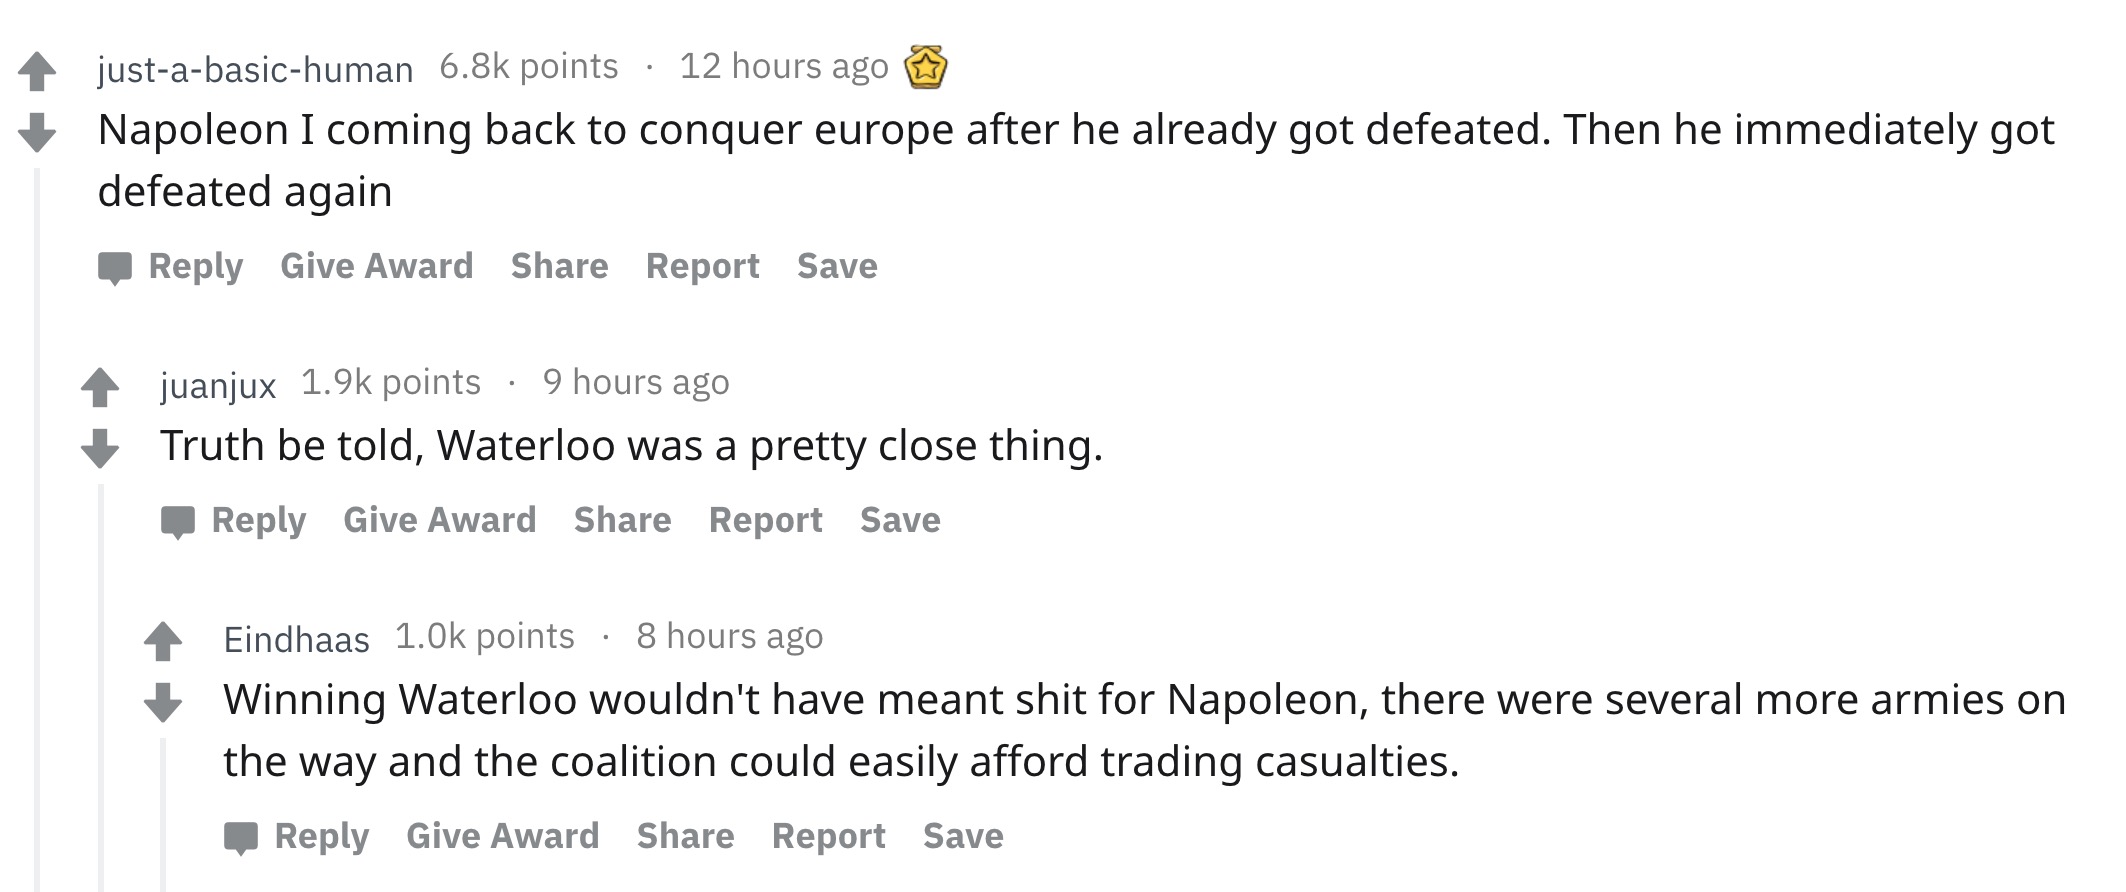 angle - justabasichuman points 12 hours ago Napoleon I coming back to conquer europe after he already got defeated. Then he immediately got defeated again Give Award Report Save juanjux points 9 hours ago Truth be told, Waterloo was a pretty close thing.